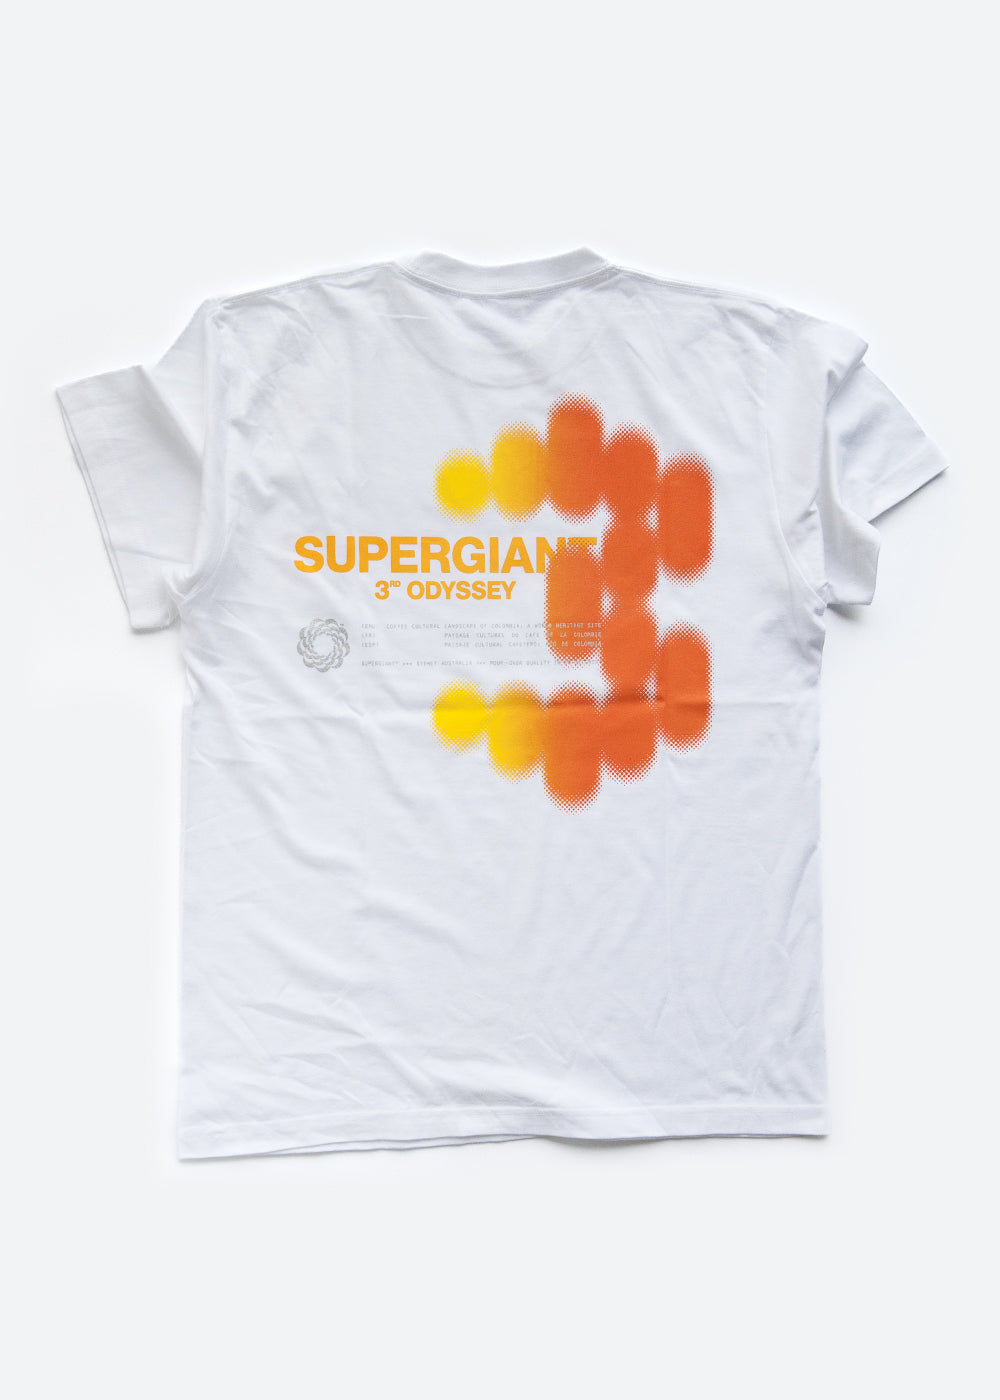 SUPERGIANT™ 3RD ODYSSEY T-SHIRT WHITE